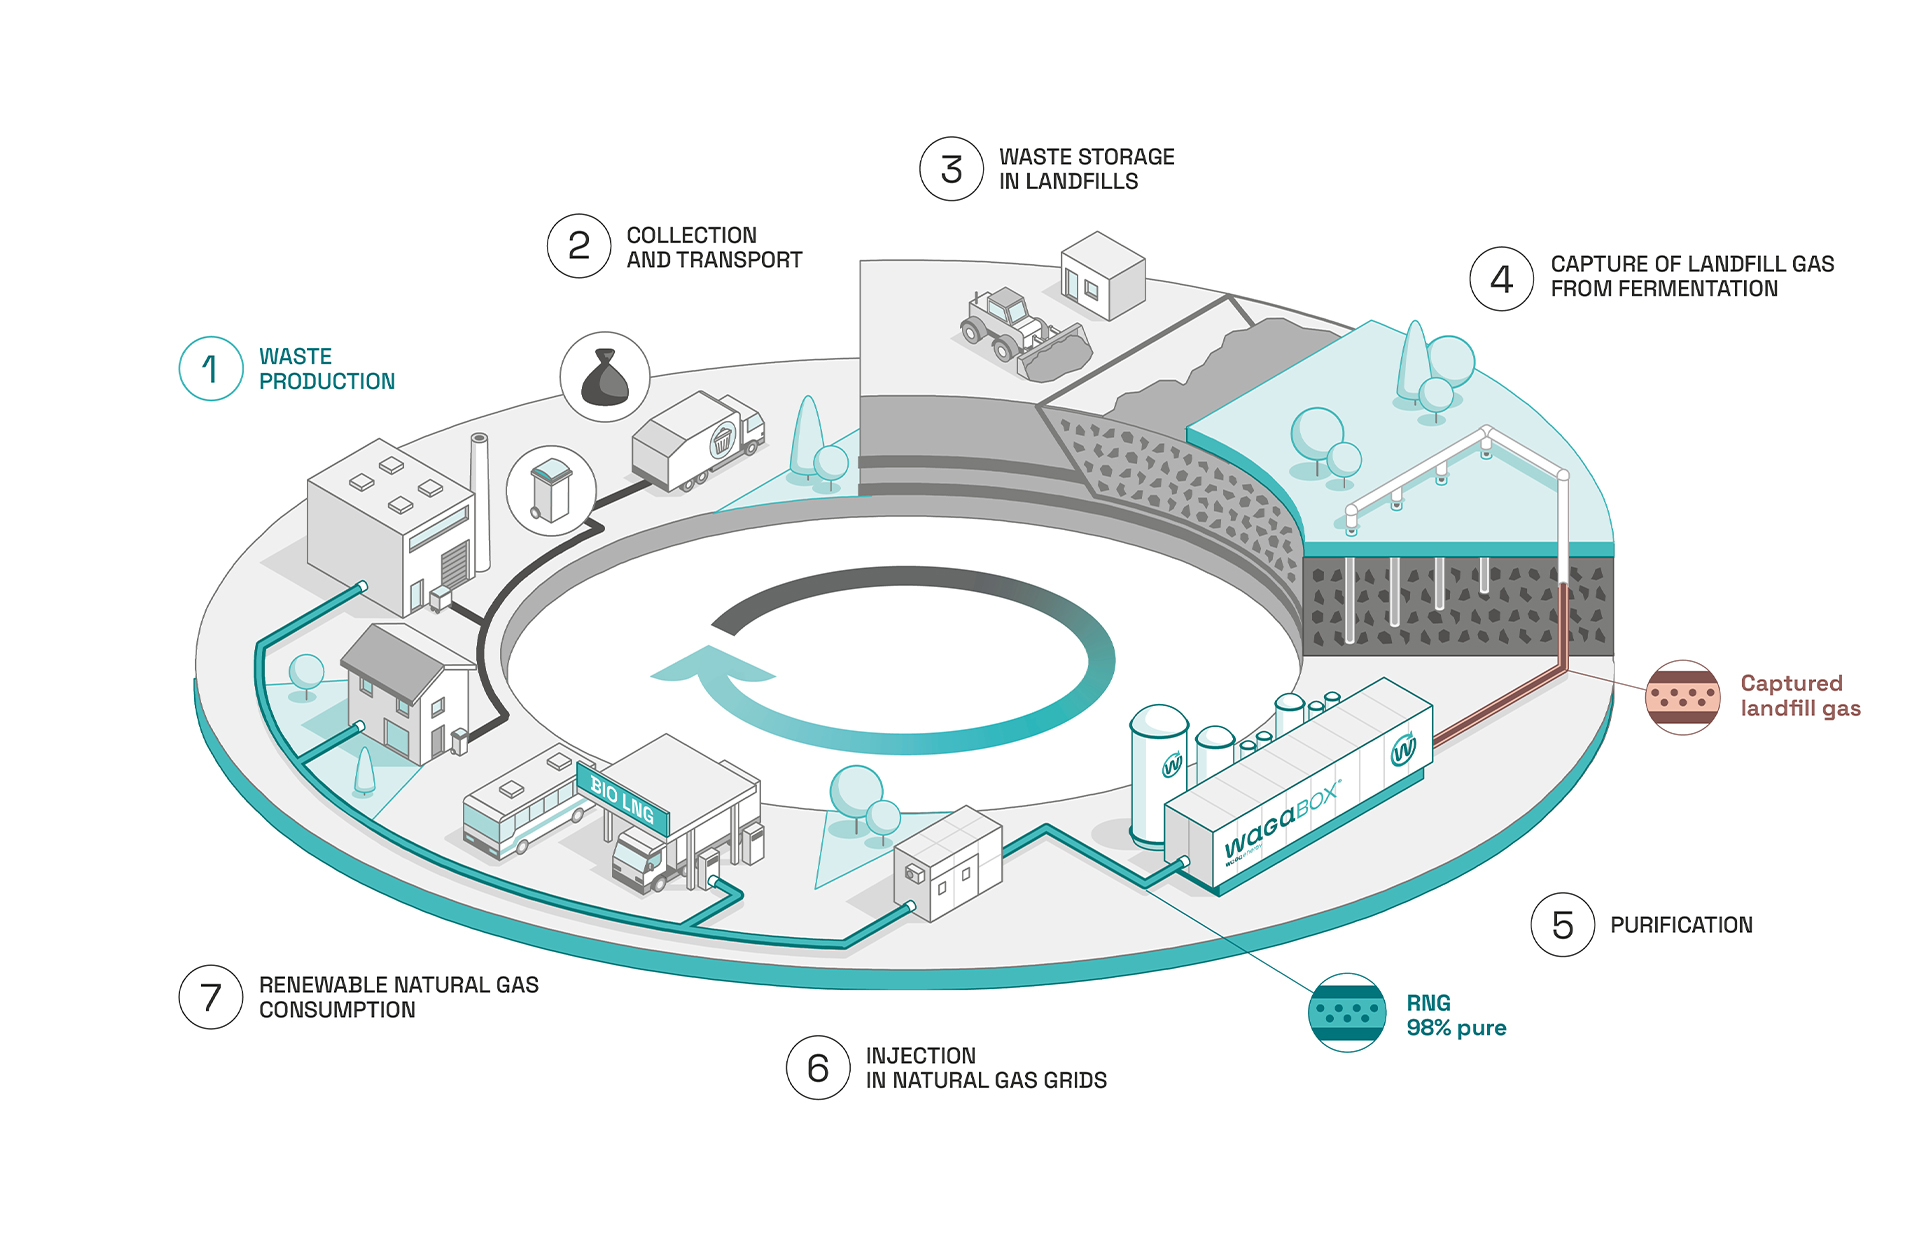 Illustration showing the place of Waga Energy and the WAGABOX in the circular economy. Step 1: Waste production individuals and industry. Step 2: Collection and transport of the wastes. Step 3: Waste storage in landfills. Step 4: Capture of the biogas produced by fermentation of the landfilled wastes. Step 5: Biogas purification. Step 6: Injection of a 98%-pure biomethane into the gas distribution pipeline. Step 7: Consumption of the renewable natural gas by individuals and industrial customers.